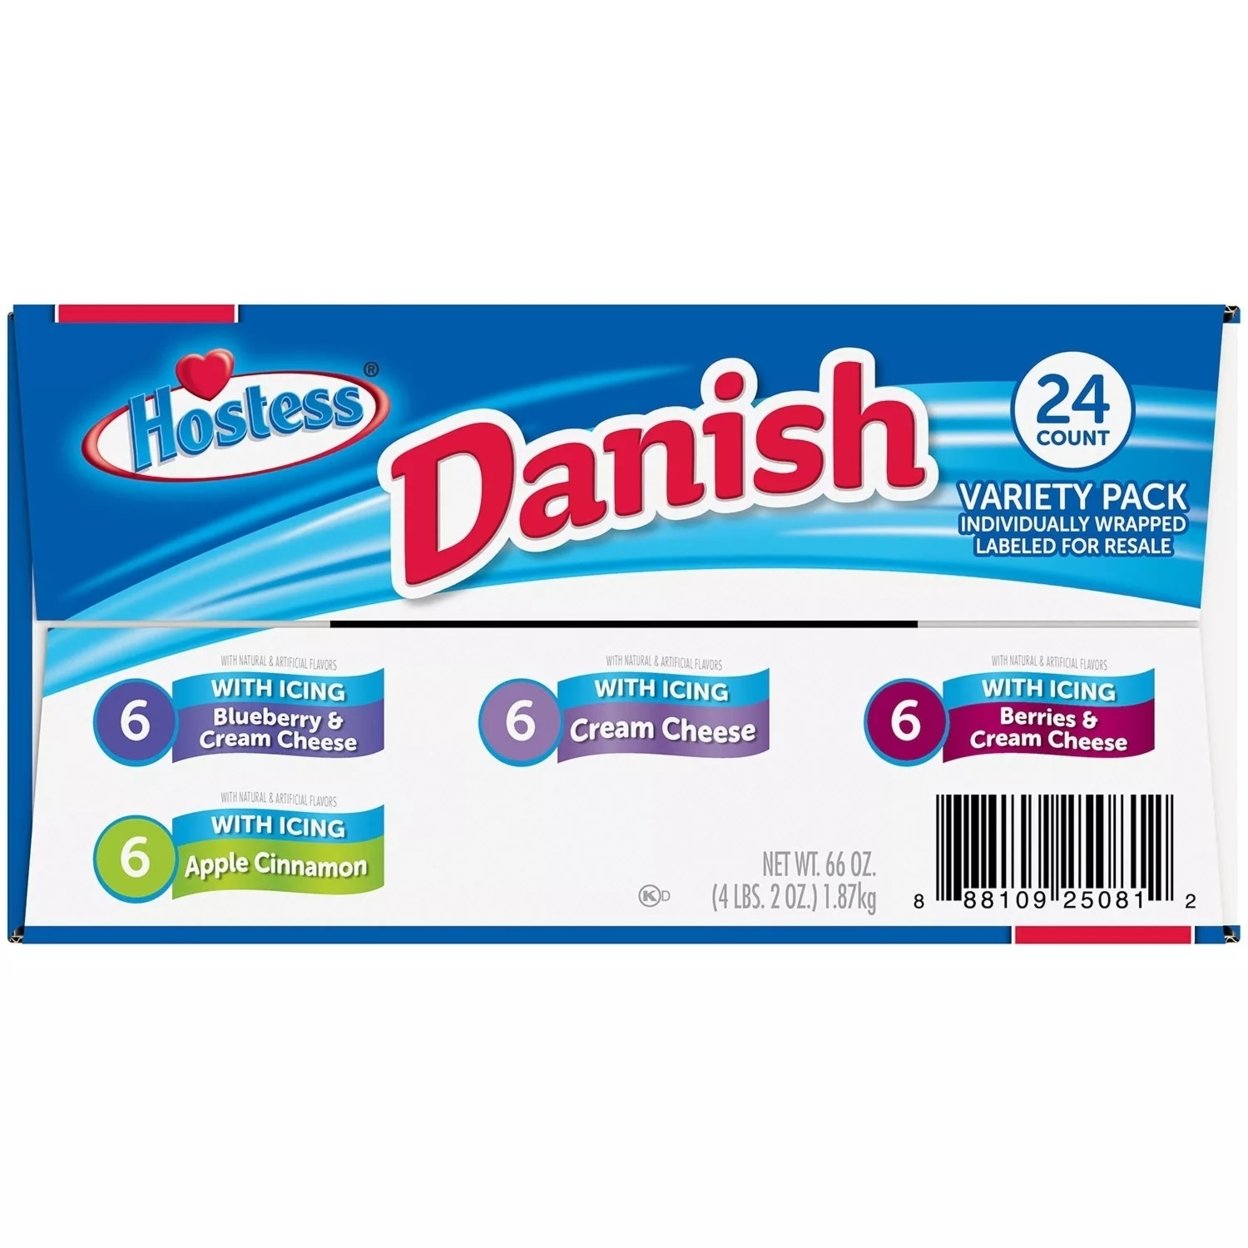 Hostess Danish Claw Variety Pack (24 Count)